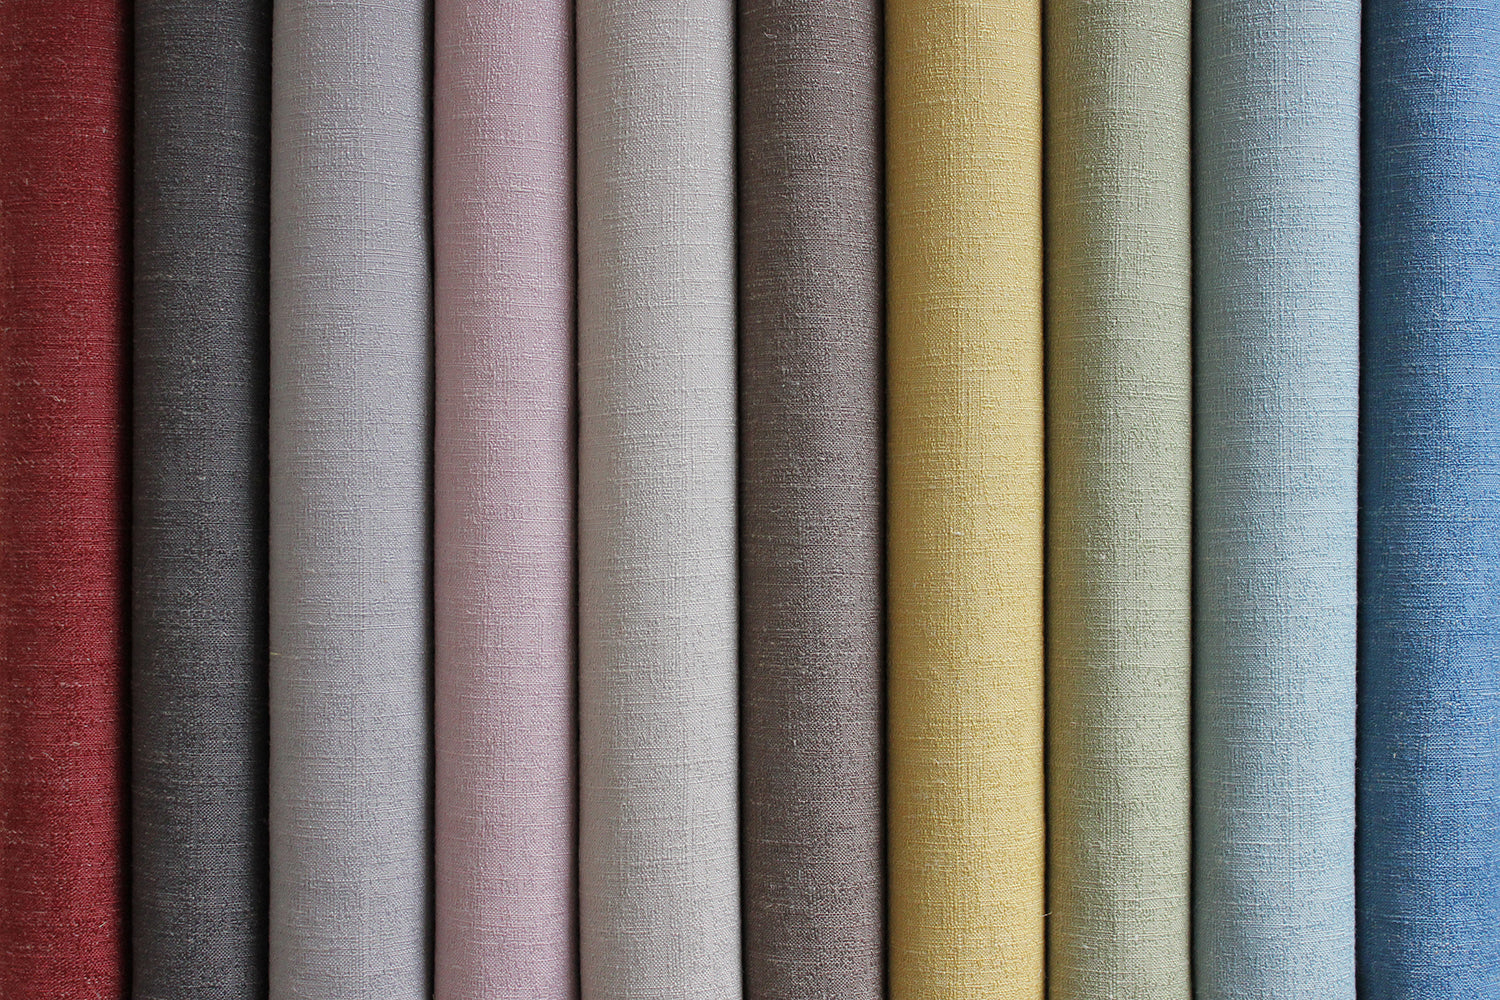 McAlister Textiles Harmony Taupe Textured Roman Blinds Roman Blinds 